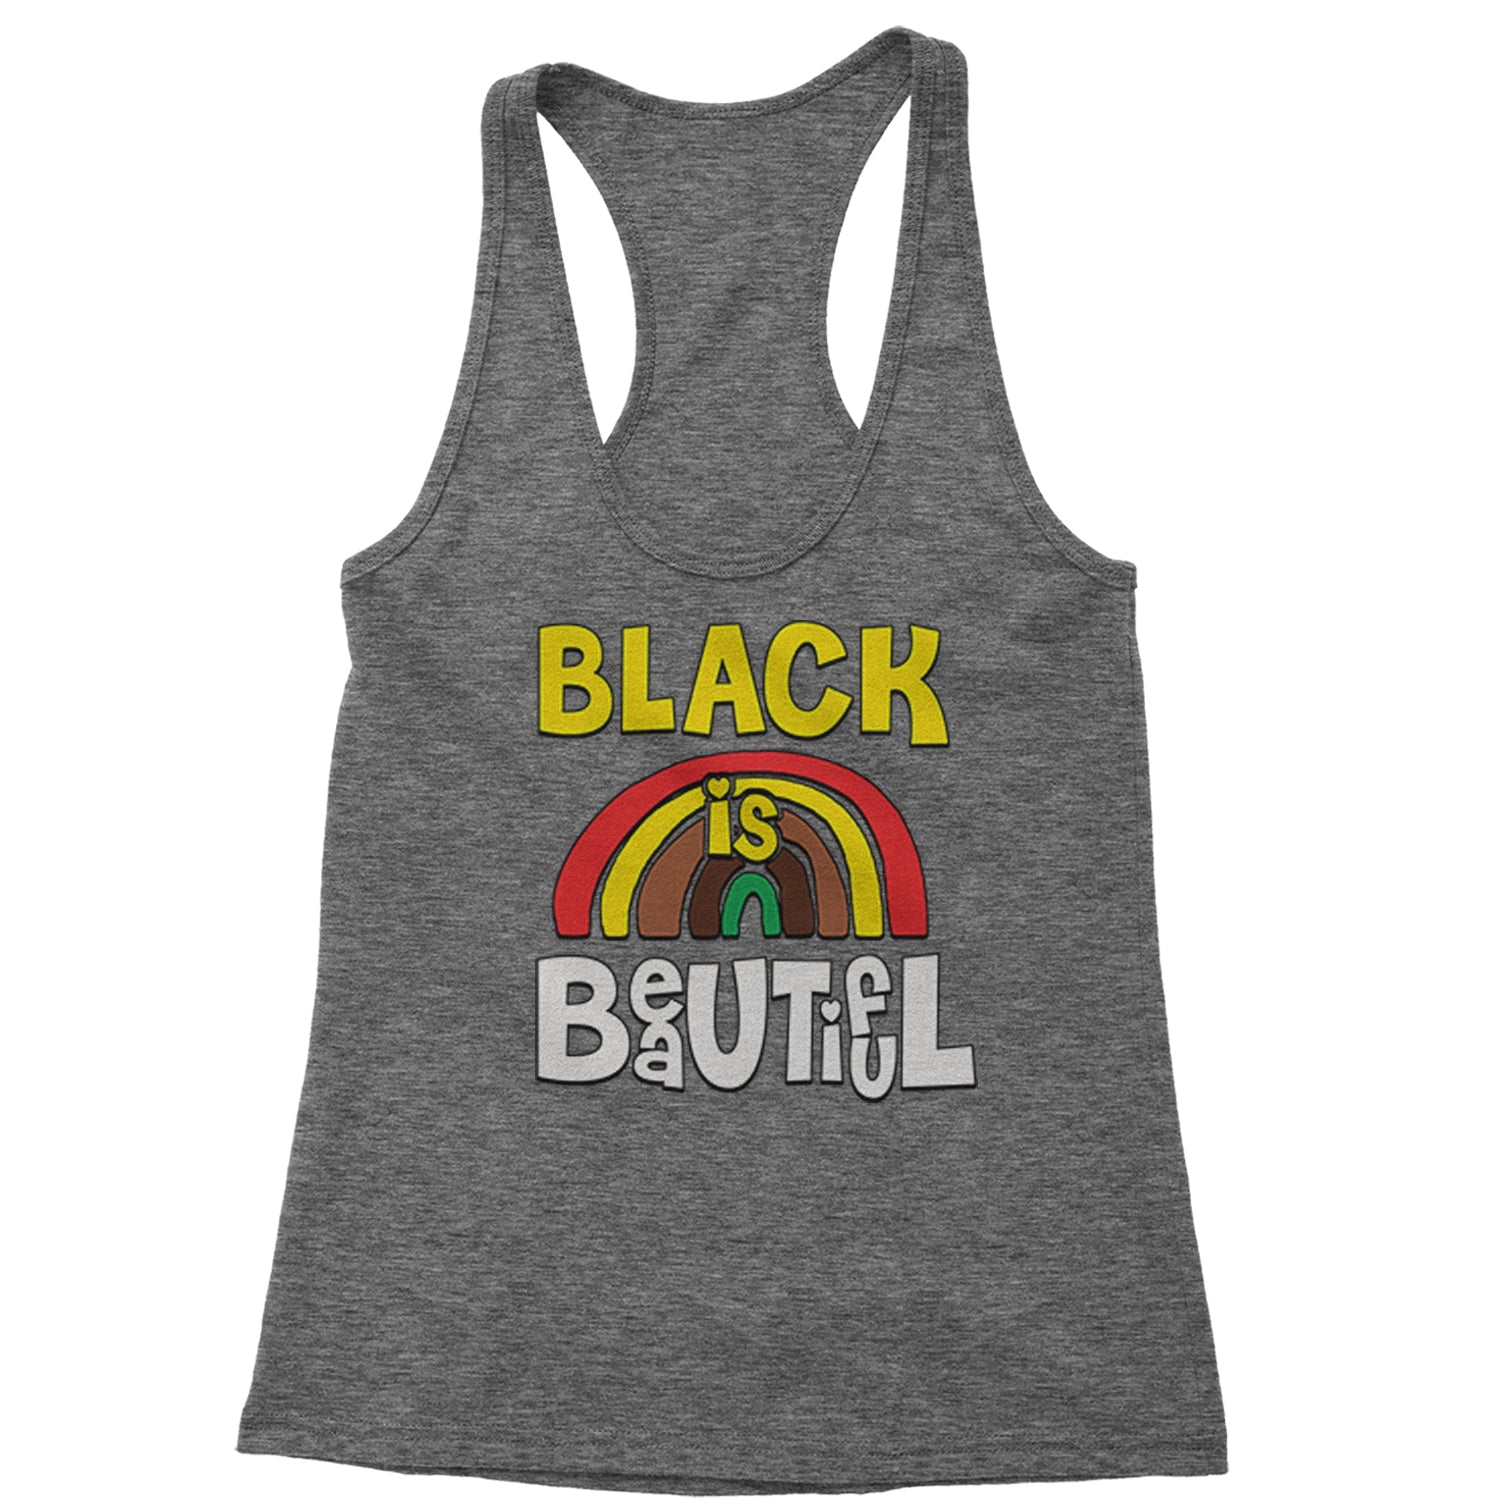 Black Is Beautiful Rainbow Racerback Tank Top for Women african, africanamerican, american, black, blackpride, blm, harriet, king, lives, luther, malcolm, march, martin, matter, parks, protest, rosa, tubman, x by Expression Tees